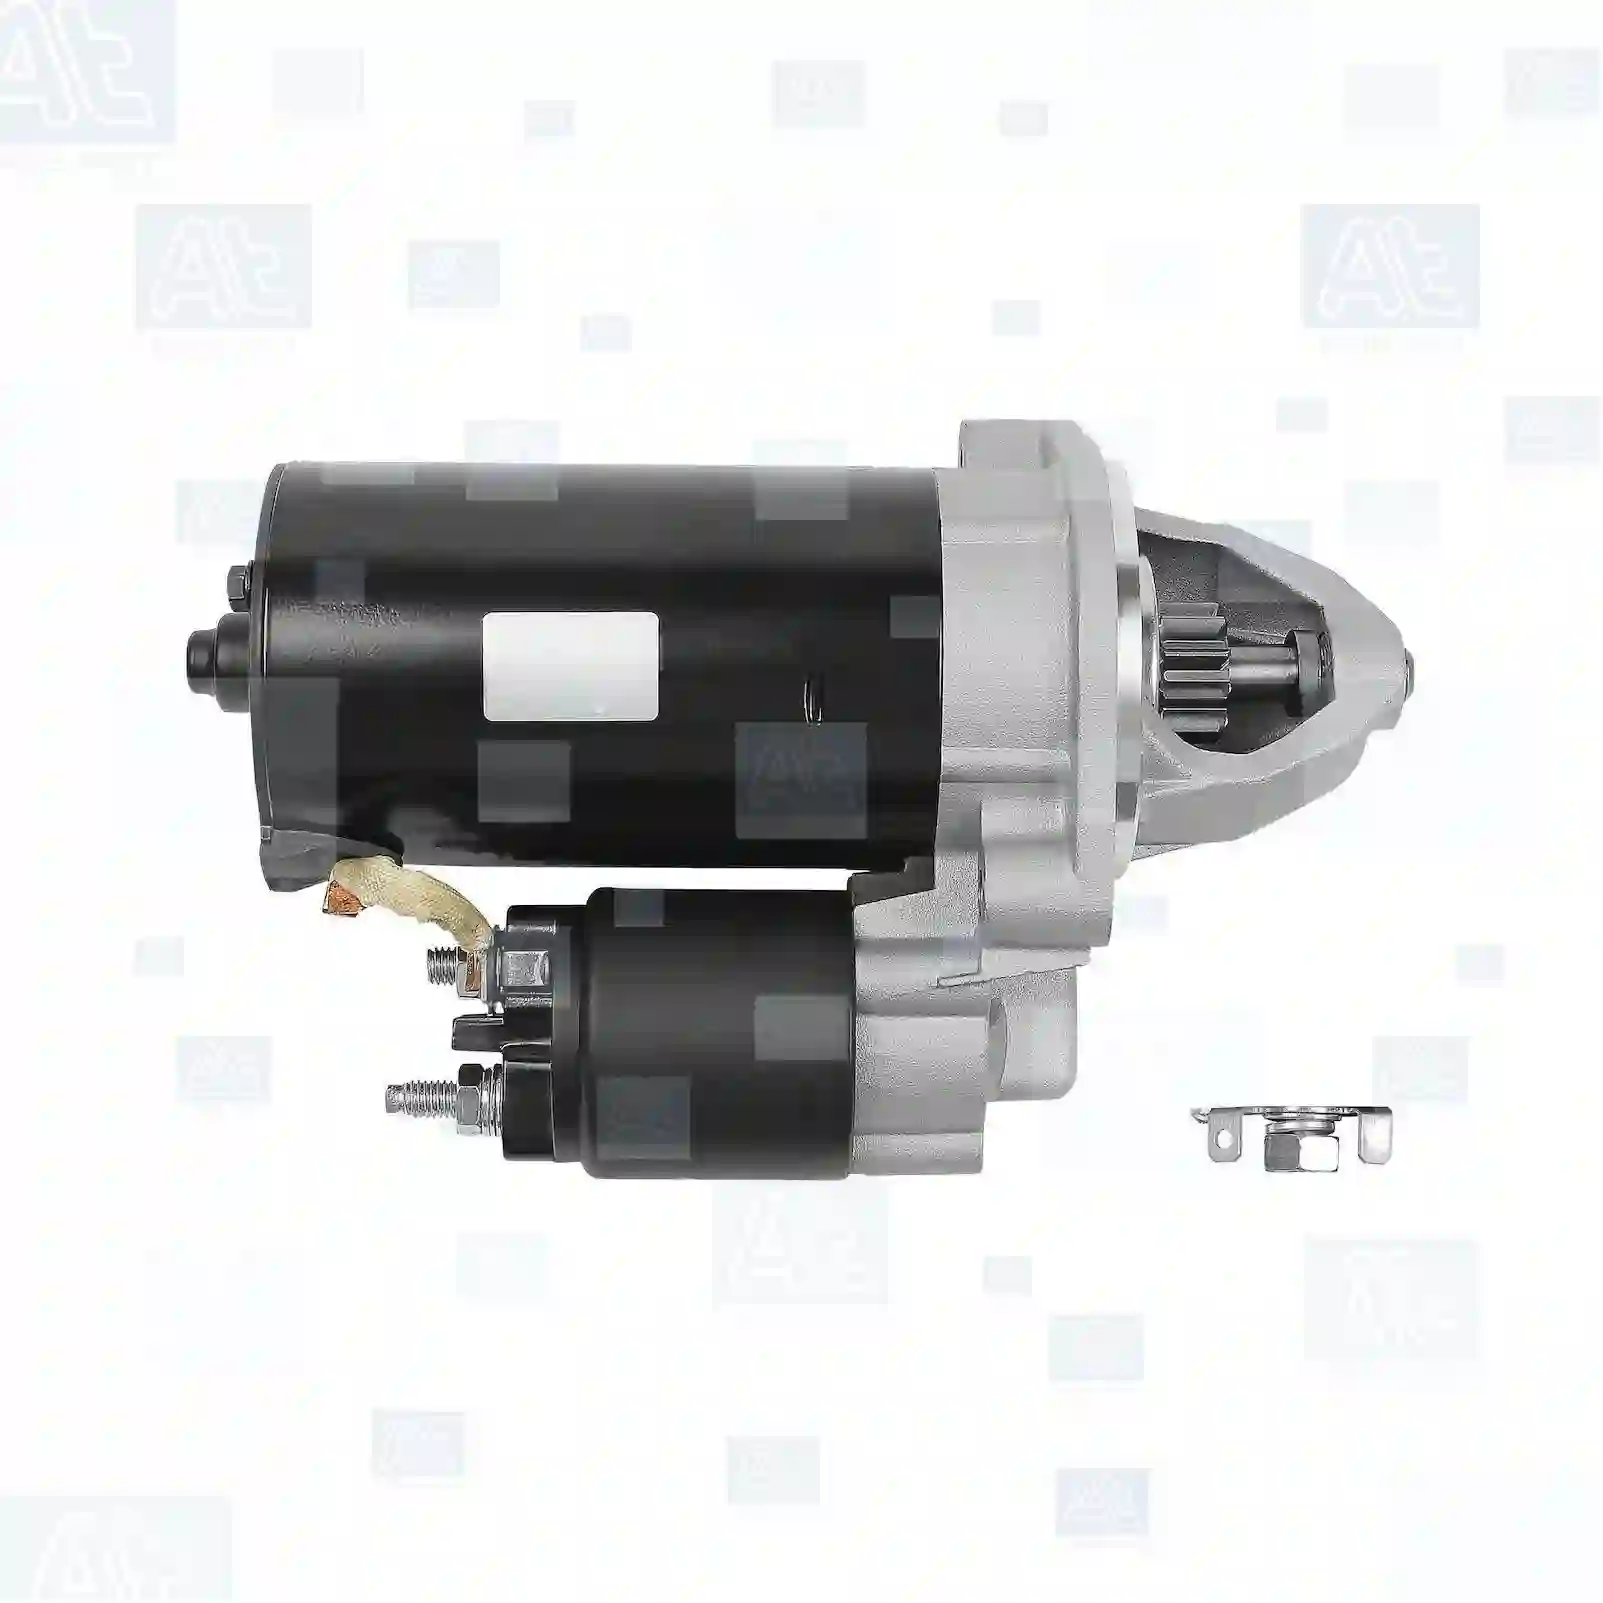 Starter, at no 77710085, oem no: 5073919AA, 5103581AA, 5103581AB, 5134510AA, 5134510AB, 0041513501, 0041517001, 6611513101, 6611513701, 1516655, 1516671, 1516735, 031114040, 031114041, SS399, SS457, SS850, 0031515001, 0041514501, 0041516501, 0041517001, 0031512901, 0031515001, 003151500180, 0031517001, 0031519801, 0041512101, 0041513001, 0041513501, 0041514401, 0041514501, 0041515101, 0041515201, 0041515601, 0041516301, 0041516501, 0041516601, 0041516701, 0041517001, 0041517101, 0041517901, 0041518901, 004151890180, 0041519201, 004151920180, 0041519701, 0051511301, 005151130180, 0051512901, 0051516601, 005151660180, 005151660180RW, 005151660180TP, 0061513201, 0071518901, 0071519201, 1621513001, 6611513101, 6611513501, 0041513501, 0041517001, 6611513101, 6611513201, 6611513401, 6611513501, 6611513701, 6611513801, 6611513901, 0041517101 At Spare Part | Engine, Accelerator Pedal, Camshaft, Connecting Rod, Crankcase, Crankshaft, Cylinder Head, Engine Suspension Mountings, Exhaust Manifold, Exhaust Gas Recirculation, Filter Kits, Flywheel Housing, General Overhaul Kits, Engine, Intake Manifold, Oil Cleaner, Oil Cooler, Oil Filter, Oil Pump, Oil Sump, Piston & Liner, Sensor & Switch, Timing Case, Turbocharger, Cooling System, Belt Tensioner, Coolant Filter, Coolant Pipe, Corrosion Prevention Agent, Drive, Expansion Tank, Fan, Intercooler, Monitors & Gauges, Radiator, Thermostat, V-Belt / Timing belt, Water Pump, Fuel System, Electronical Injector Unit, Feed Pump, Fuel Filter, cpl., Fuel Gauge Sender,  Fuel Line, Fuel Pump, Fuel Tank, Injection Line Kit, Injection Pump, Exhaust System, Clutch & Pedal, Gearbox, Propeller Shaft, Axles, Brake System, Hubs & Wheels, Suspension, Leaf Spring, Universal Parts / Accessories, Steering, Electrical System, Cabin Starter, at no 77710085, oem no: 5073919AA, 5103581AA, 5103581AB, 5134510AA, 5134510AB, 0041513501, 0041517001, 6611513101, 6611513701, 1516655, 1516671, 1516735, 031114040, 031114041, SS399, SS457, SS850, 0031515001, 0041514501, 0041516501, 0041517001, 0031512901, 0031515001, 003151500180, 0031517001, 0031519801, 0041512101, 0041513001, 0041513501, 0041514401, 0041514501, 0041515101, 0041515201, 0041515601, 0041516301, 0041516501, 0041516601, 0041516701, 0041517001, 0041517101, 0041517901, 0041518901, 004151890180, 0041519201, 004151920180, 0041519701, 0051511301, 005151130180, 0051512901, 0051516601, 005151660180, 005151660180RW, 005151660180TP, 0061513201, 0071518901, 0071519201, 1621513001, 6611513101, 6611513501, 0041513501, 0041517001, 6611513101, 6611513201, 6611513401, 6611513501, 6611513701, 6611513801, 6611513901, 0041517101 At Spare Part | Engine, Accelerator Pedal, Camshaft, Connecting Rod, Crankcase, Crankshaft, Cylinder Head, Engine Suspension Mountings, Exhaust Manifold, Exhaust Gas Recirculation, Filter Kits, Flywheel Housing, General Overhaul Kits, Engine, Intake Manifold, Oil Cleaner, Oil Cooler, Oil Filter, Oil Pump, Oil Sump, Piston & Liner, Sensor & Switch, Timing Case, Turbocharger, Cooling System, Belt Tensioner, Coolant Filter, Coolant Pipe, Corrosion Prevention Agent, Drive, Expansion Tank, Fan, Intercooler, Monitors & Gauges, Radiator, Thermostat, V-Belt / Timing belt, Water Pump, Fuel System, Electronical Injector Unit, Feed Pump, Fuel Filter, cpl., Fuel Gauge Sender,  Fuel Line, Fuel Pump, Fuel Tank, Injection Line Kit, Injection Pump, Exhaust System, Clutch & Pedal, Gearbox, Propeller Shaft, Axles, Brake System, Hubs & Wheels, Suspension, Leaf Spring, Universal Parts / Accessories, Steering, Electrical System, Cabin